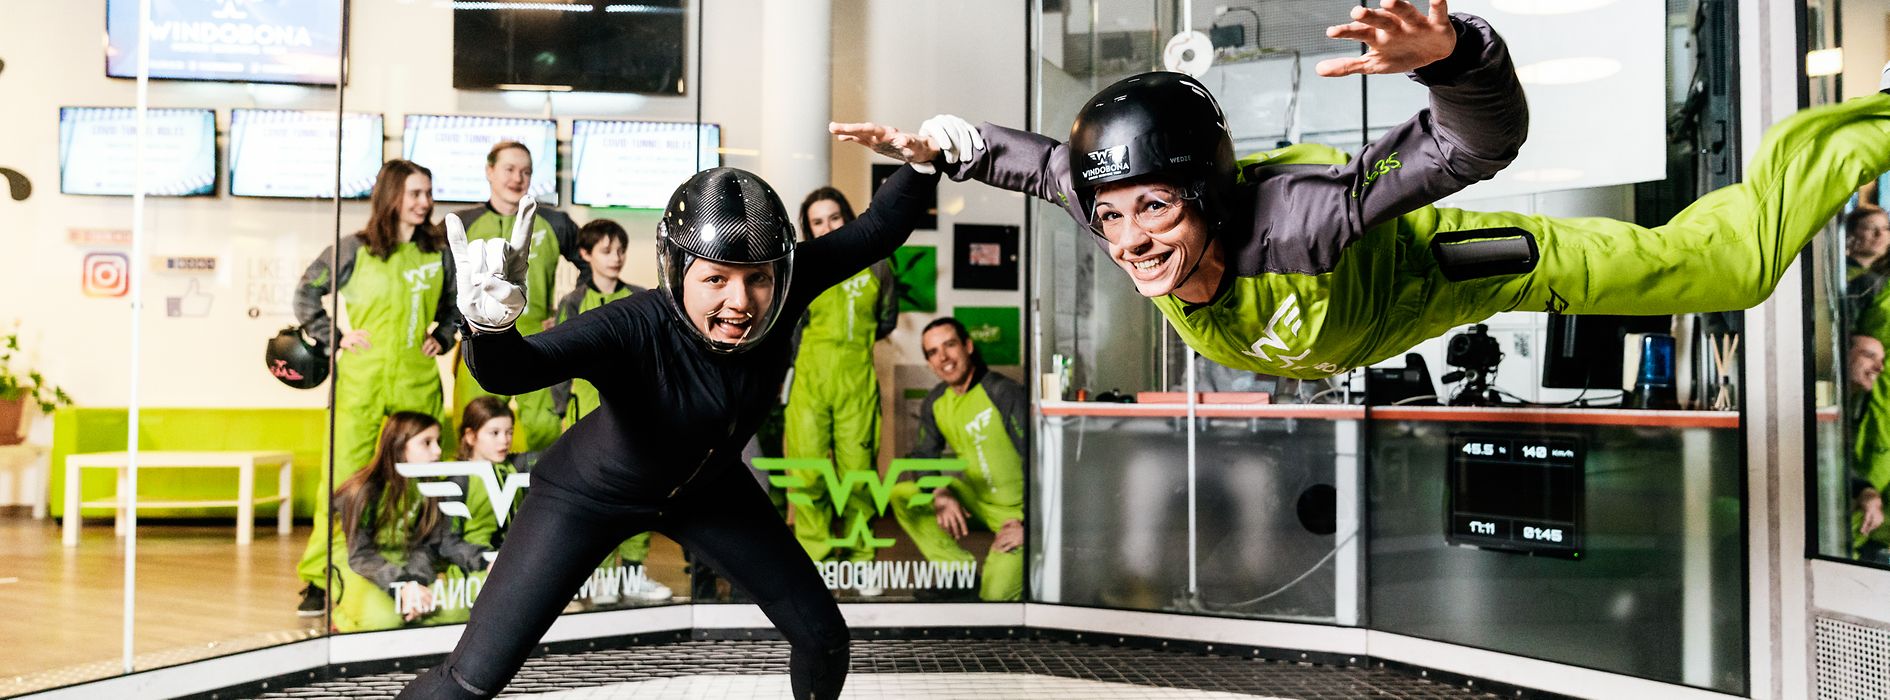 Two people in a wind tunnel